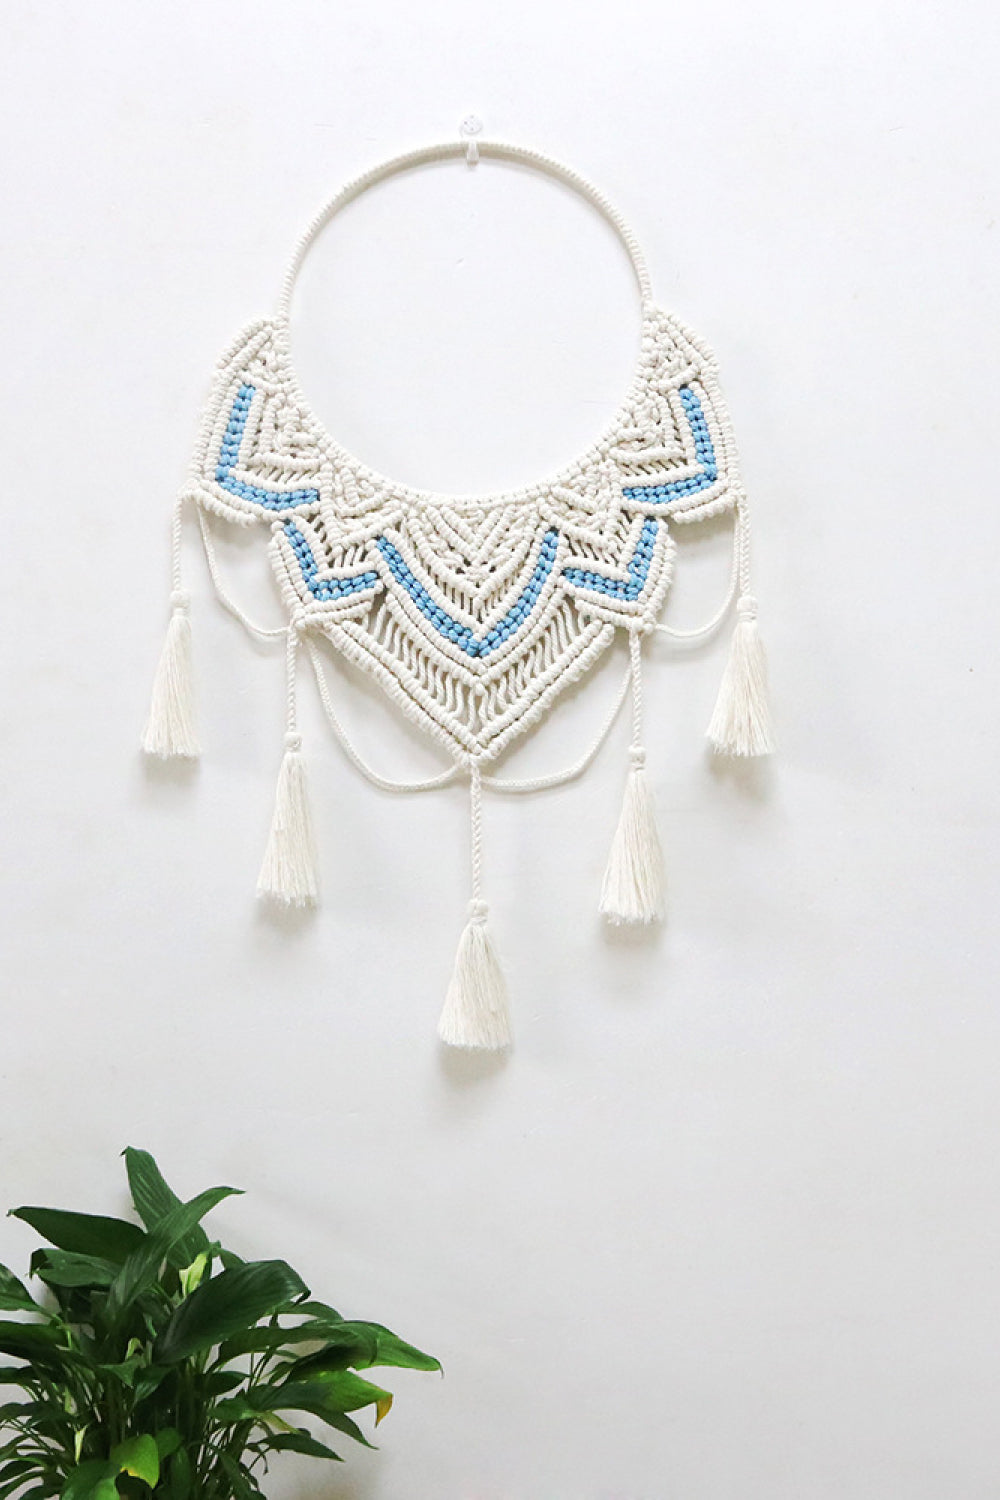 Macrame Wall Hanging with Tassel - AllIn Computer